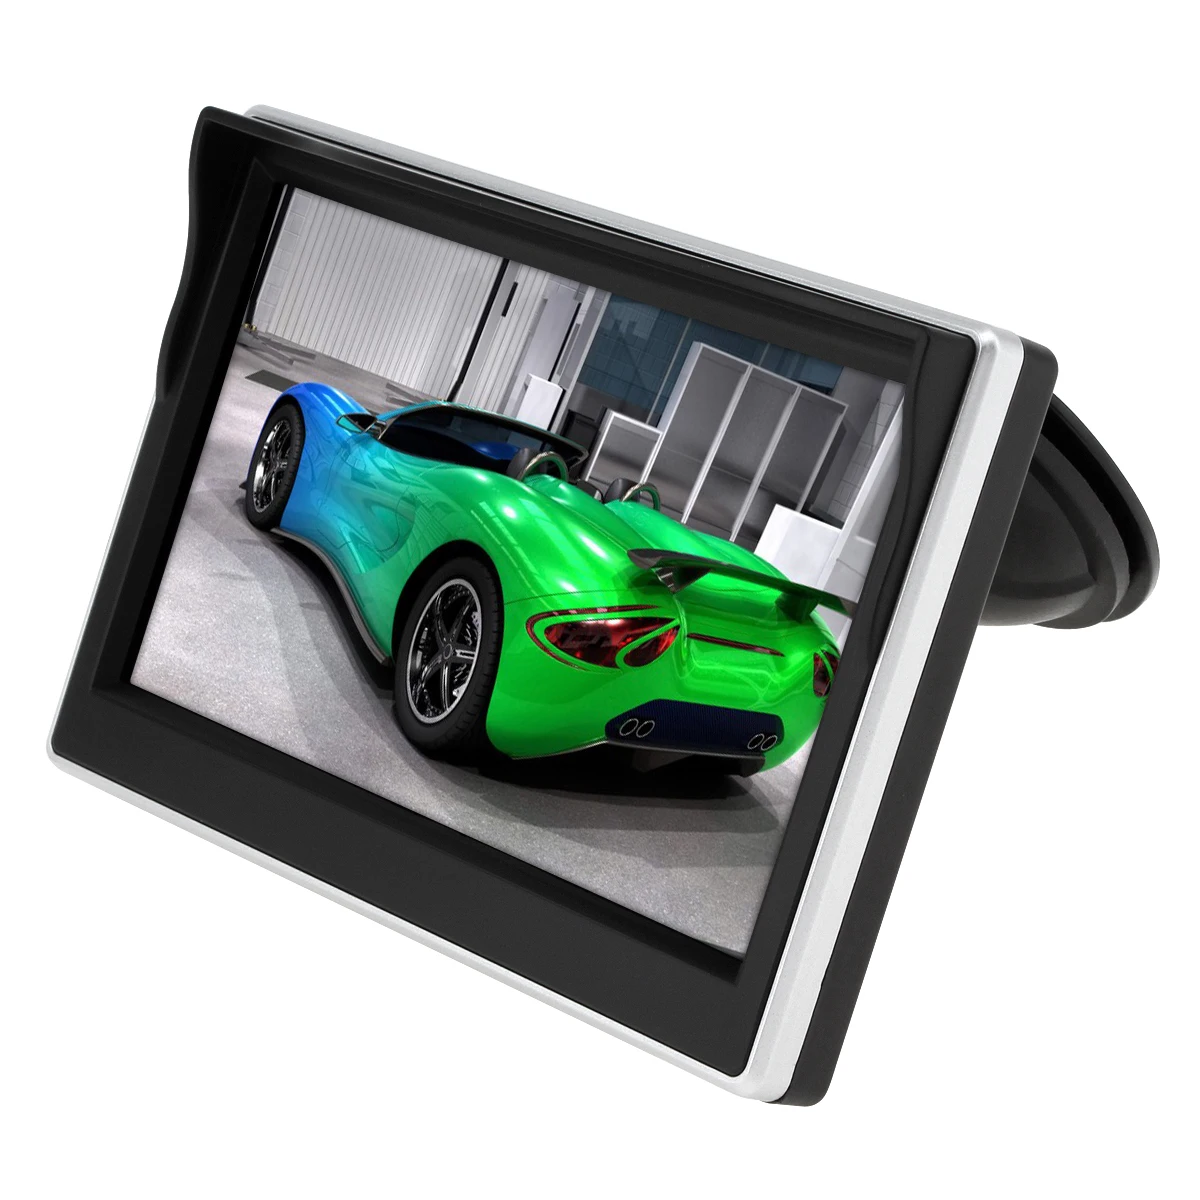 

5 Inch Car TFT LCD Monitor 800*480 16:9 Screen 2 Way Video Input +170 Degrees Wide Angle Lens Night Vision Rear View Camera